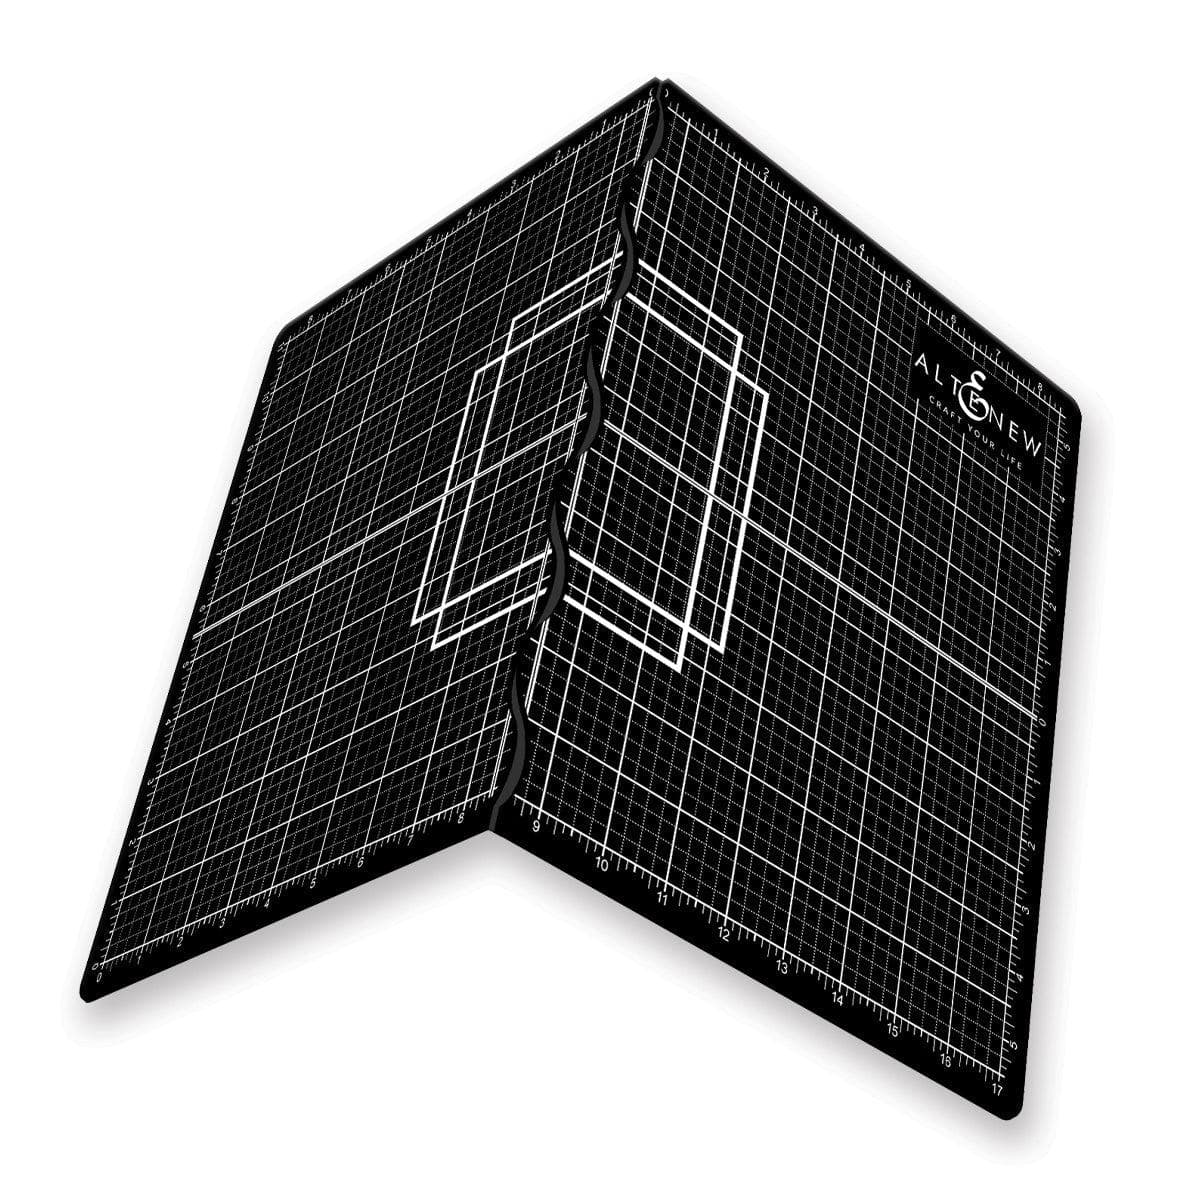 High quality cutting mat for crafting - Altenew Product Intro 